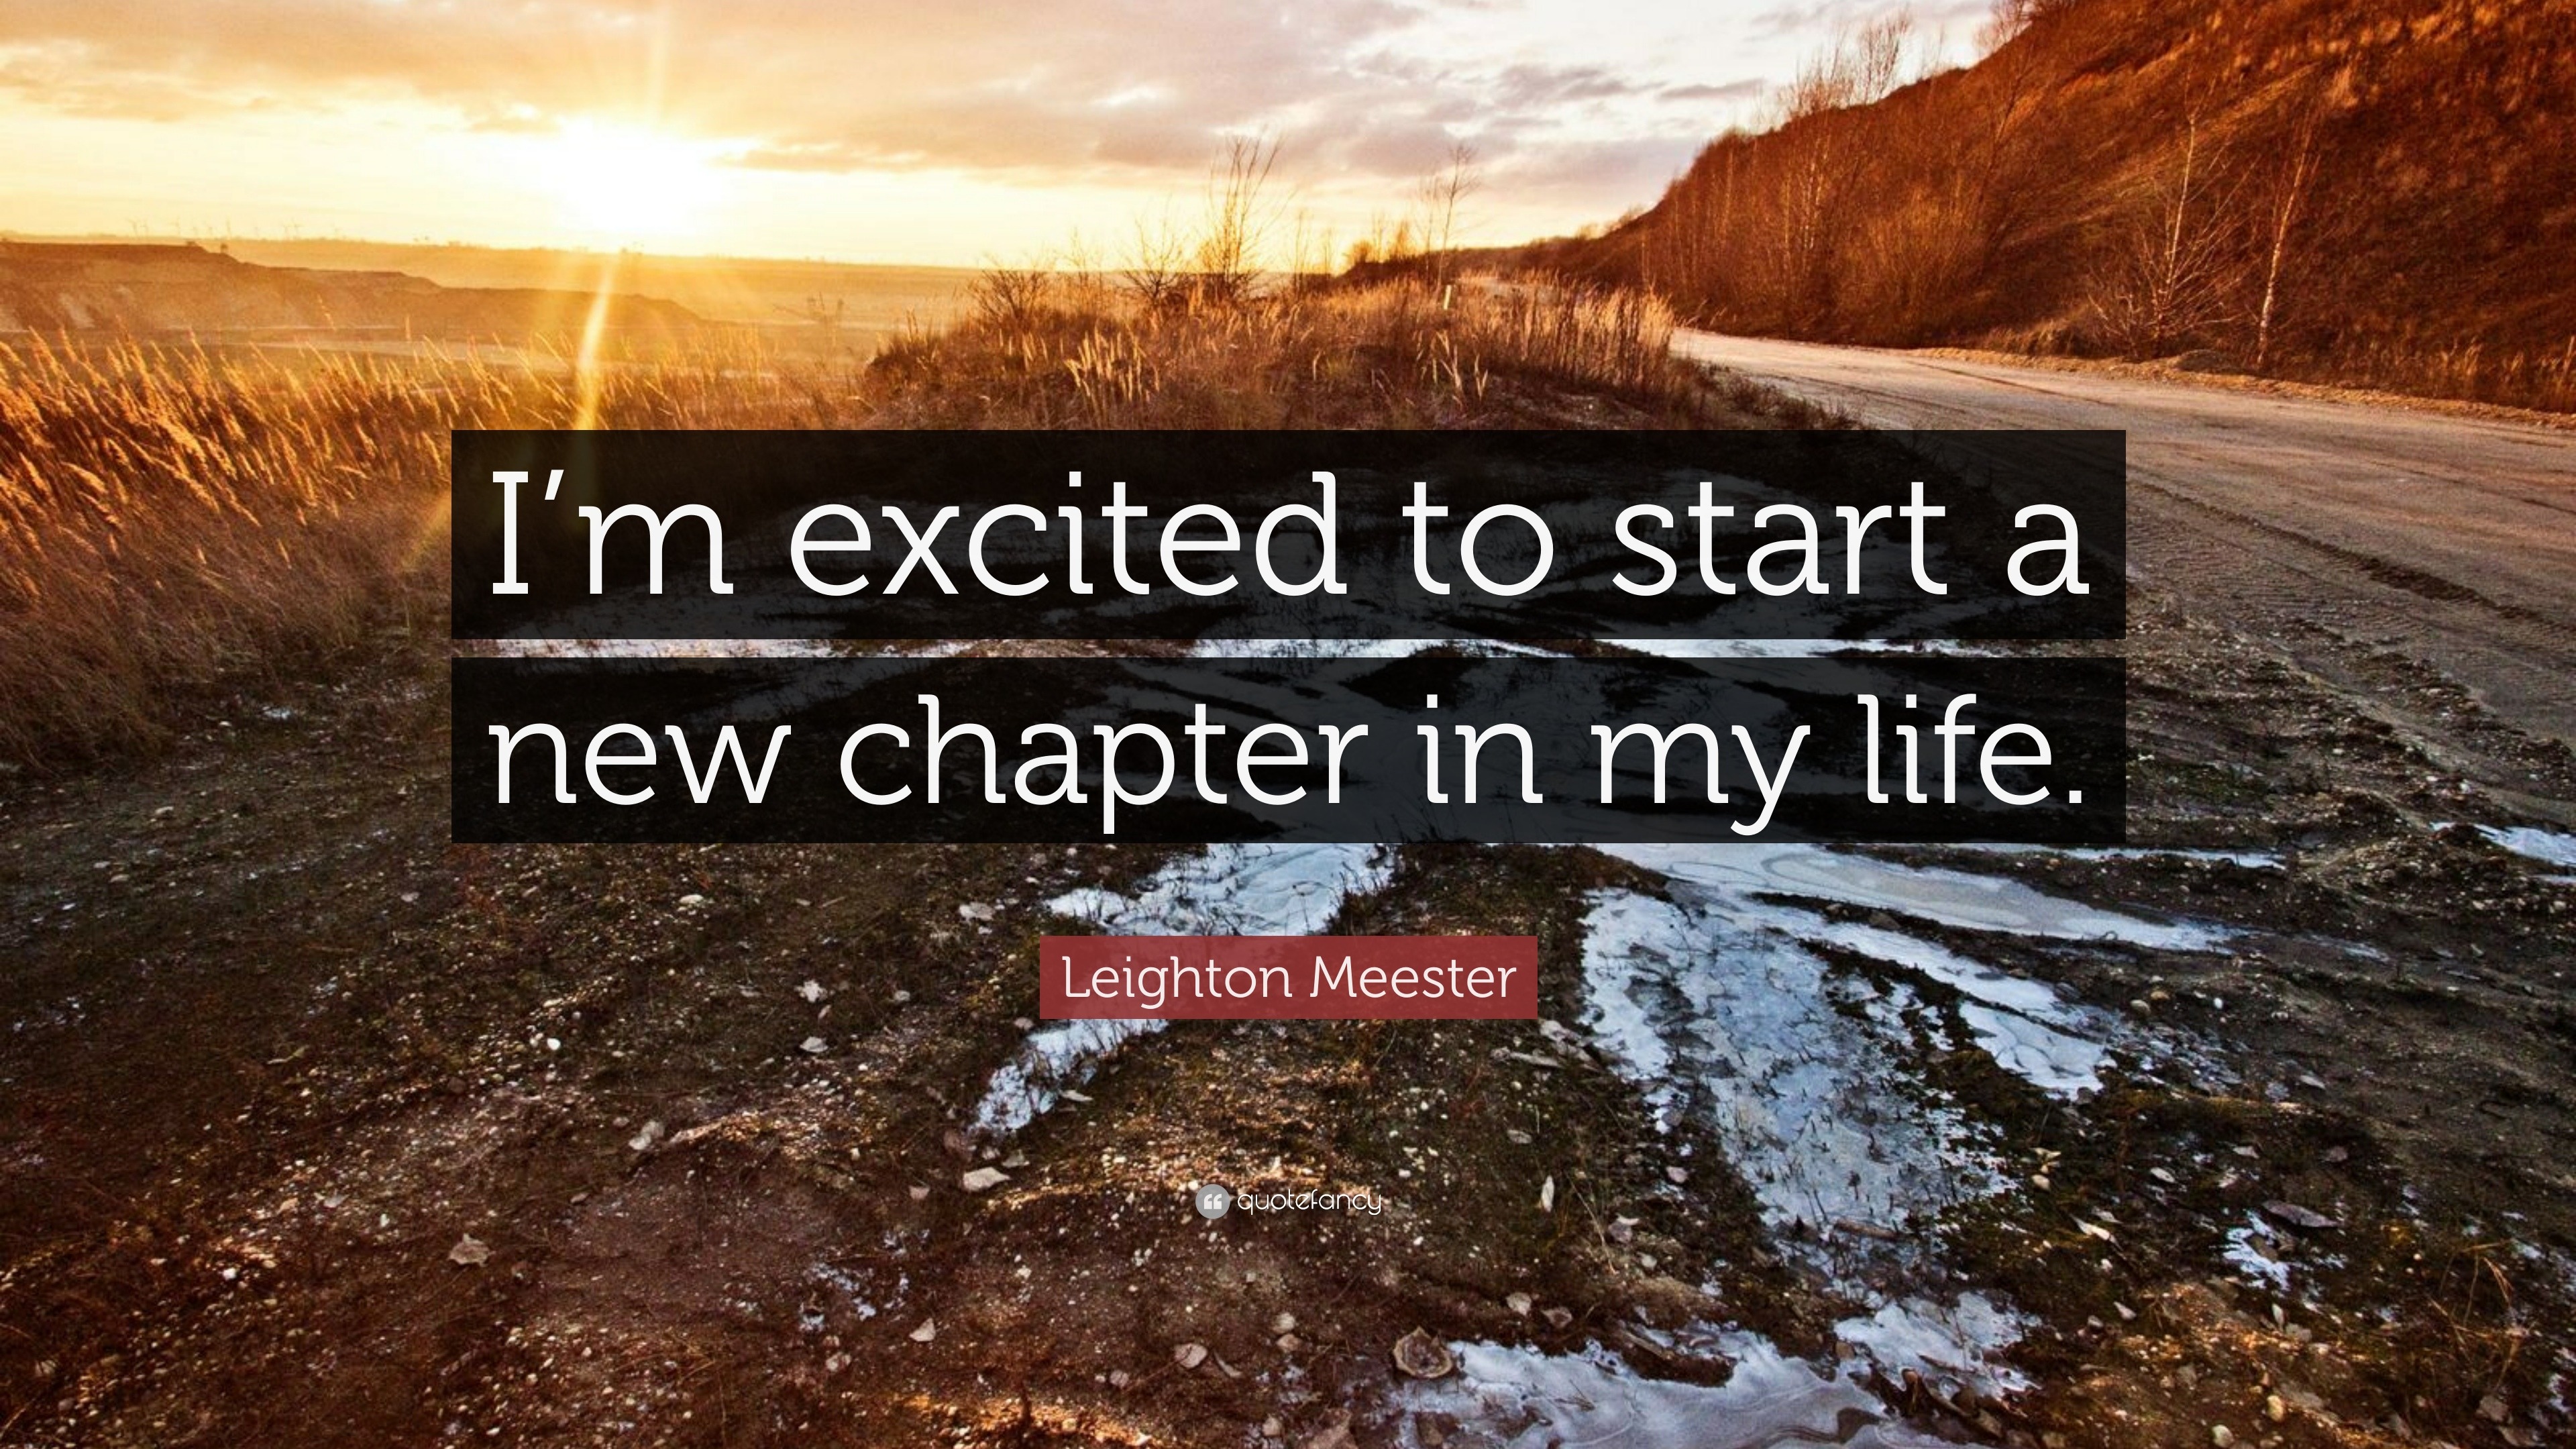 Leighton Meester Quote “I m excited to start a new chapter in my